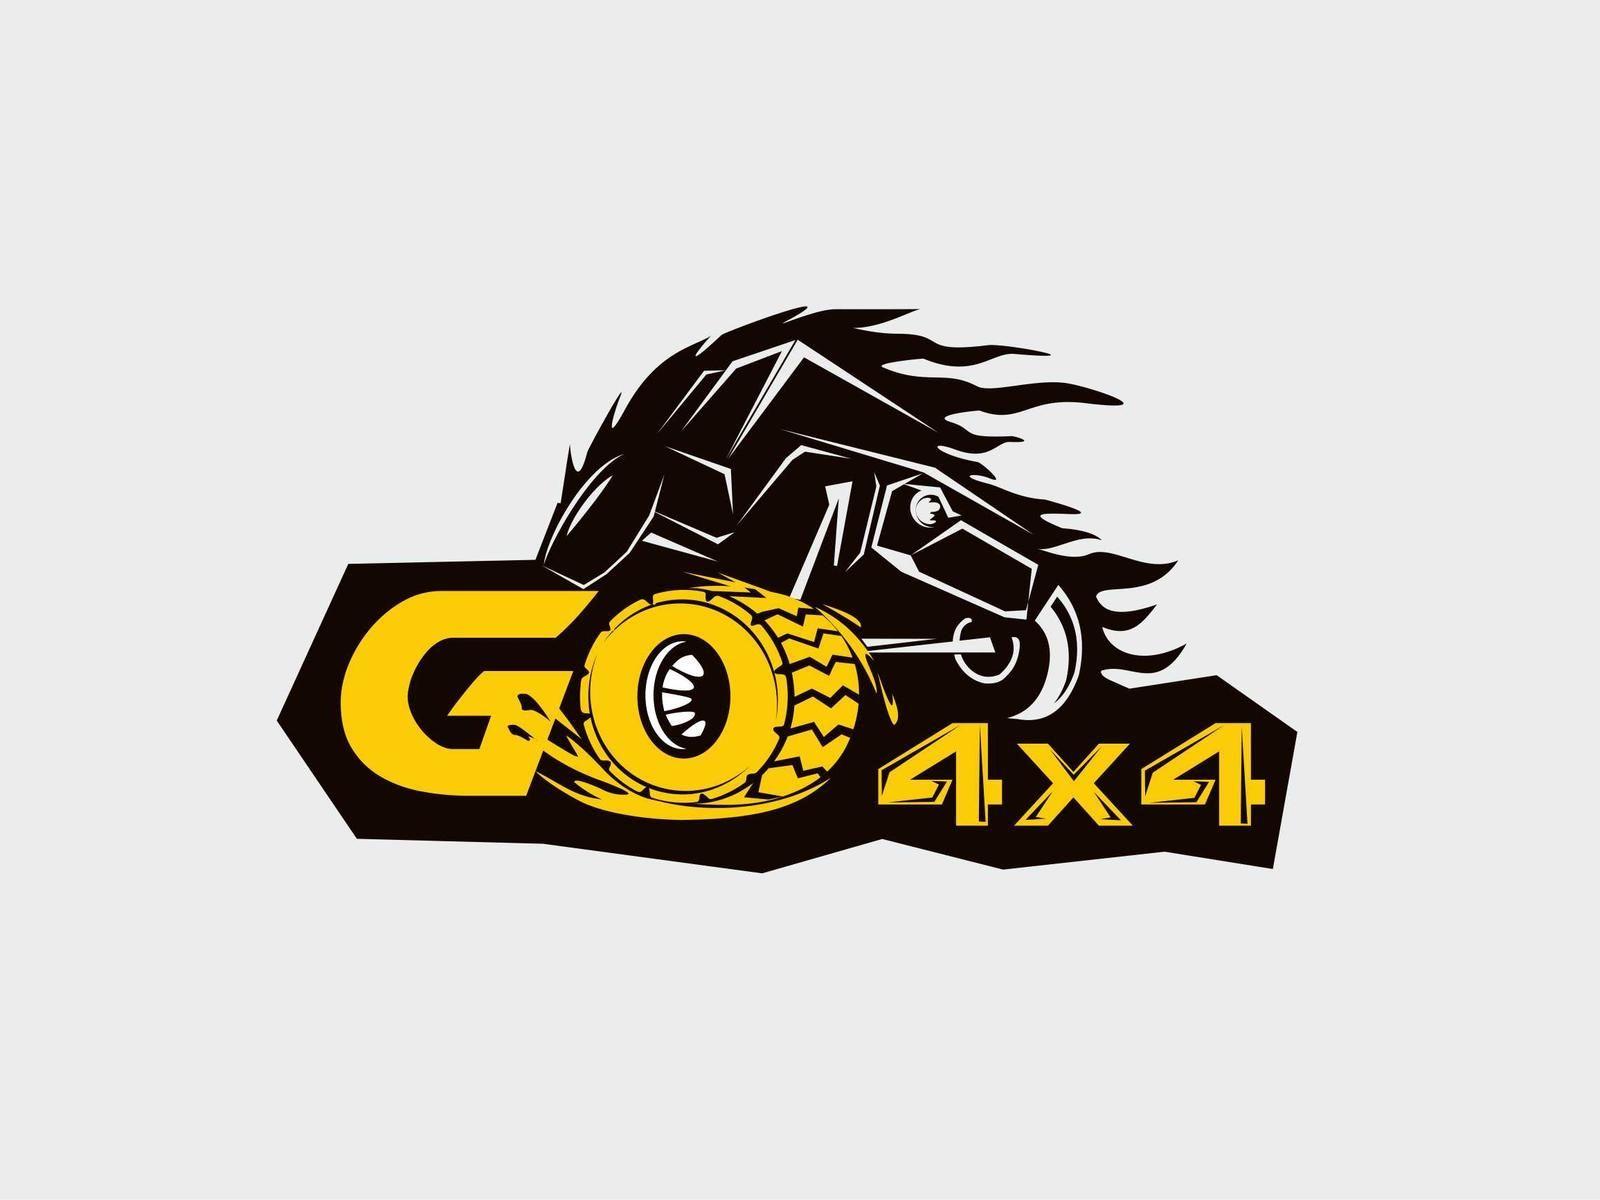 Off-Road Brand Logo - Improve a Logo for Go4x4 - Offroad Community by zvercat | Good ...